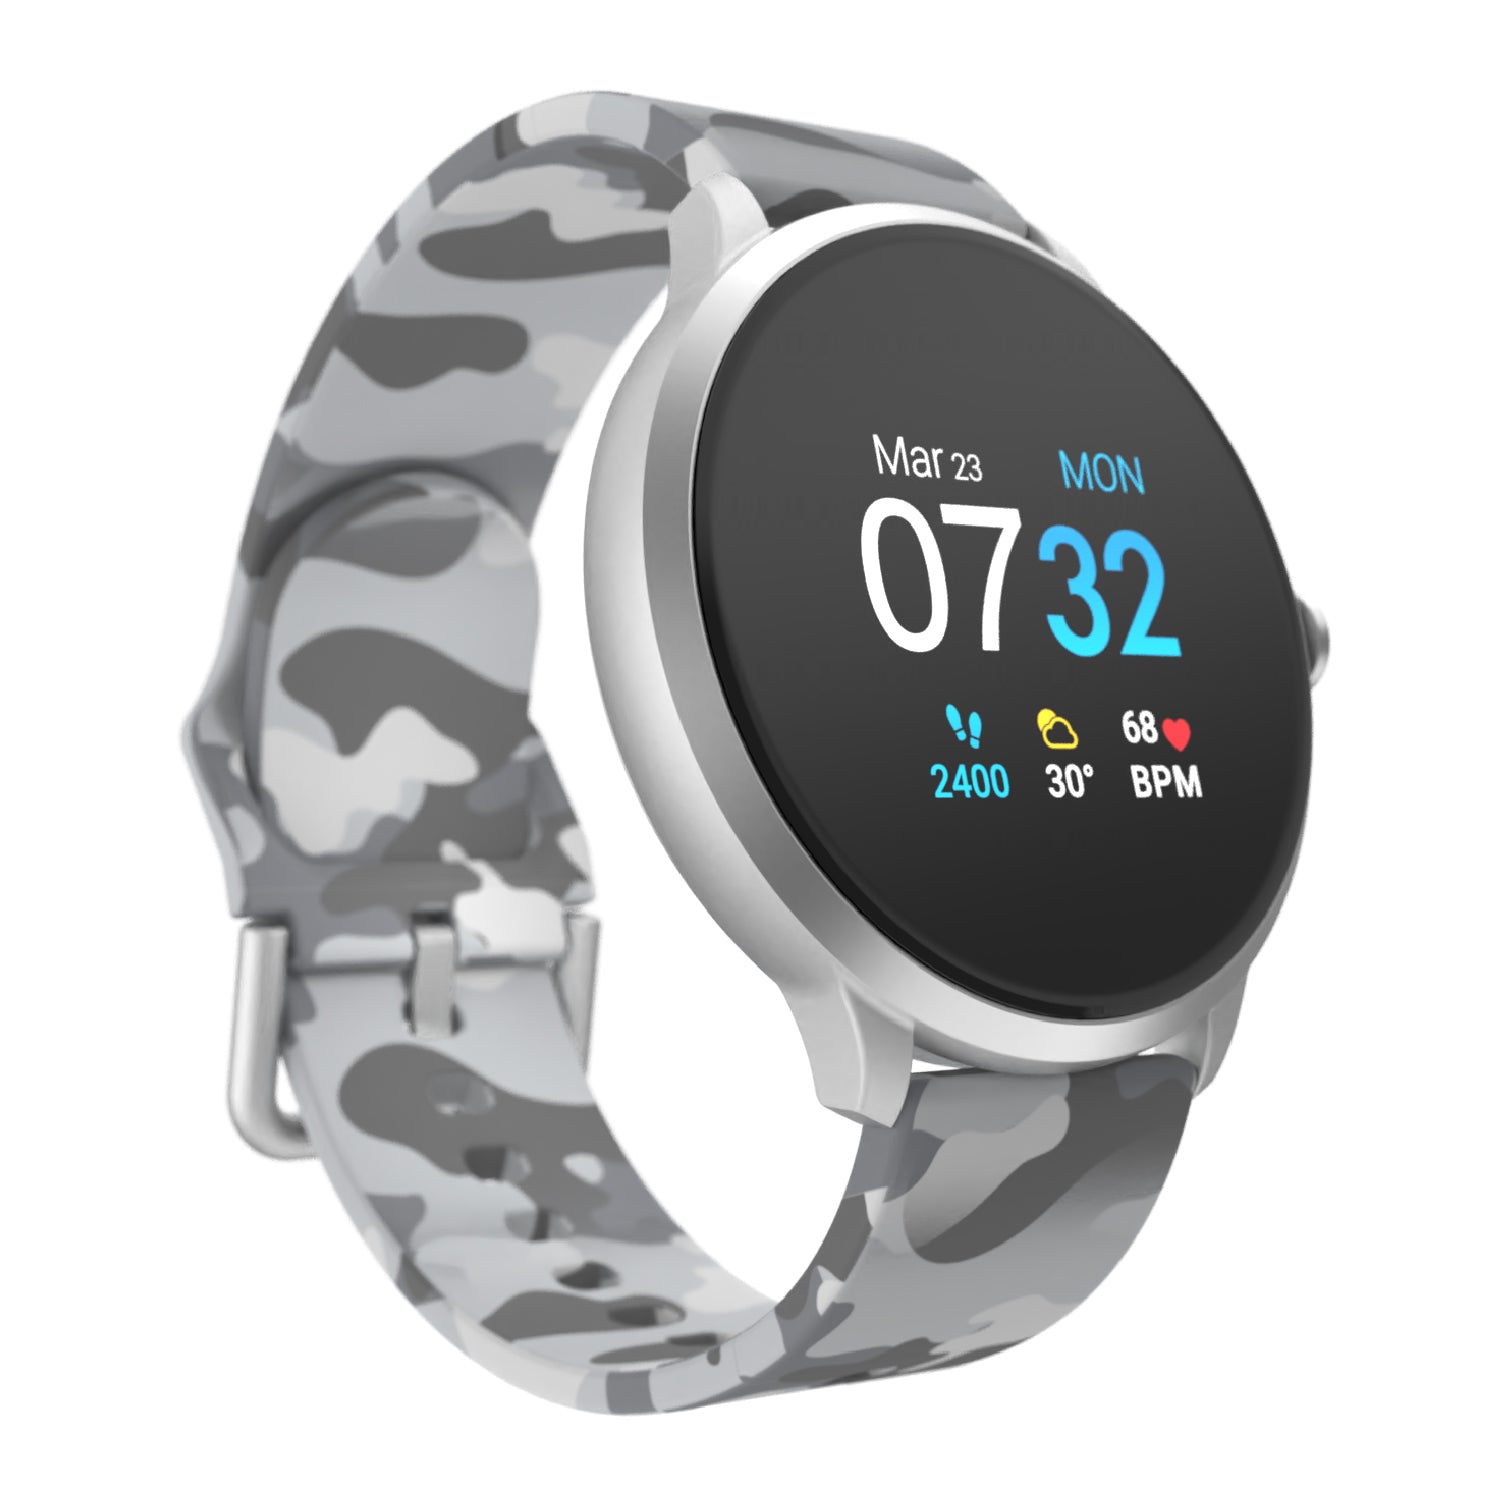 iTouch Sport 3 Smartwatch in Light Grey Camo